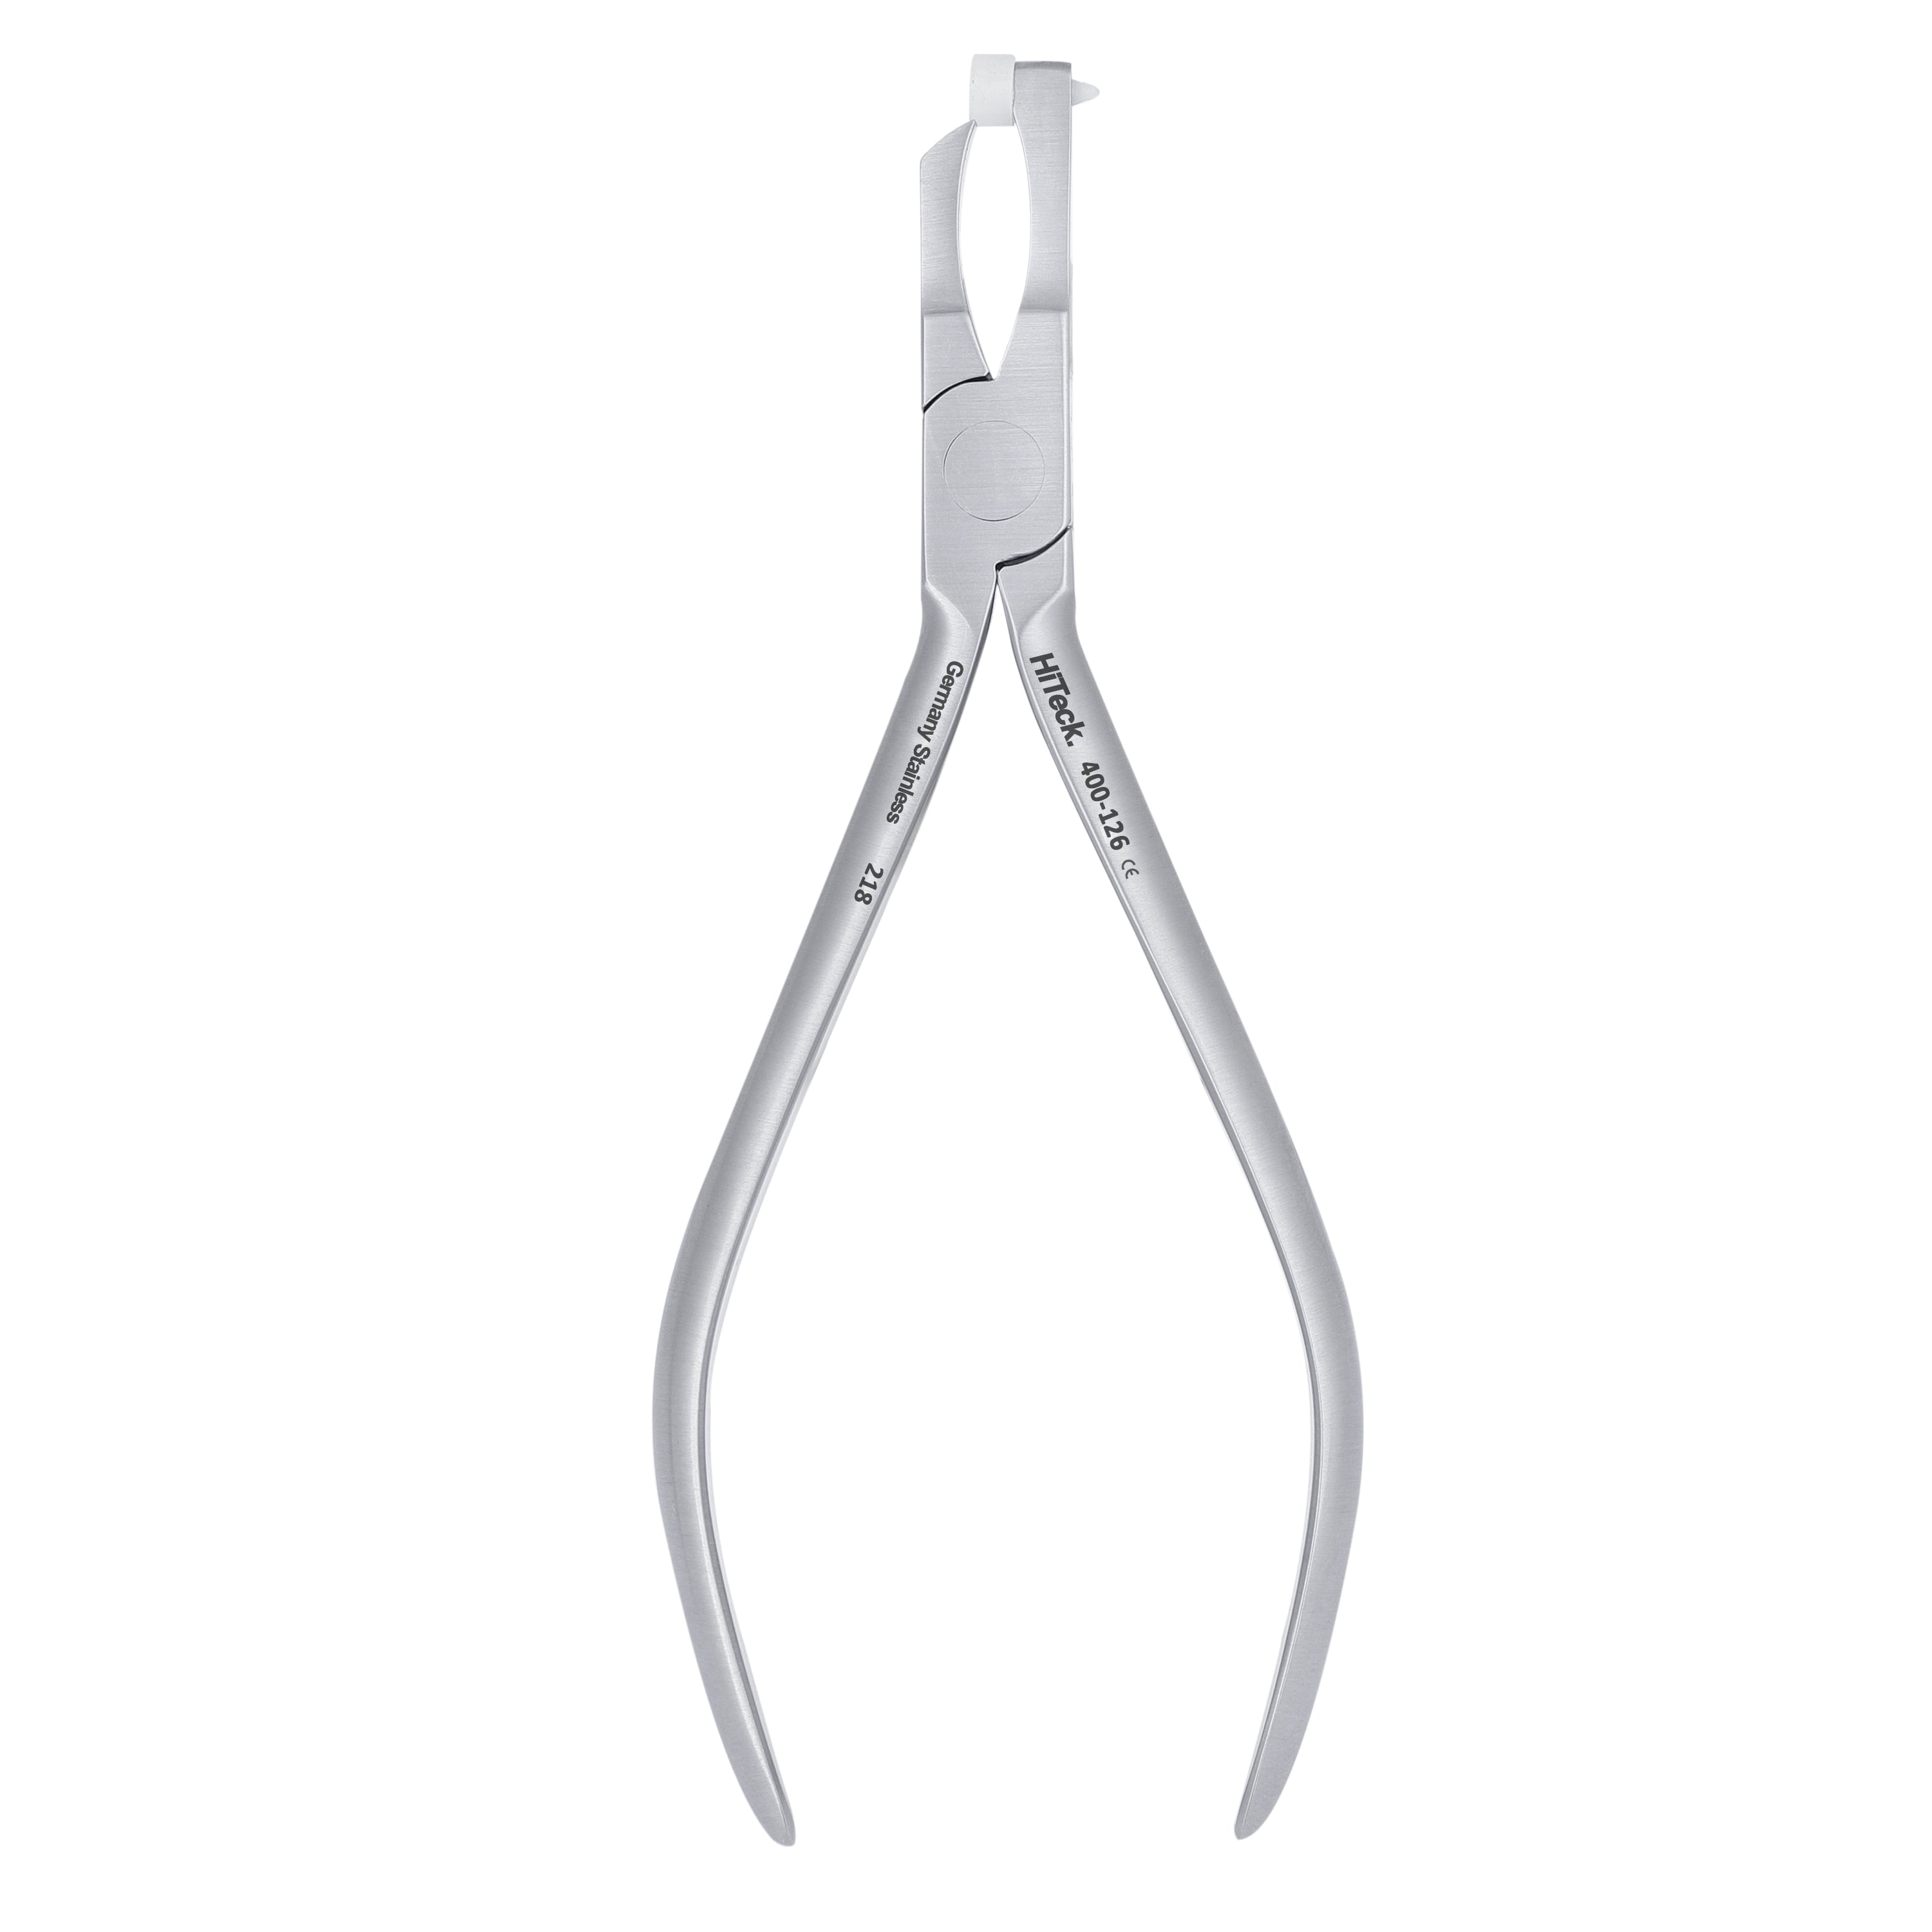 Posterior Band Removing Pliers, Short - HiTeck Medical Instruments